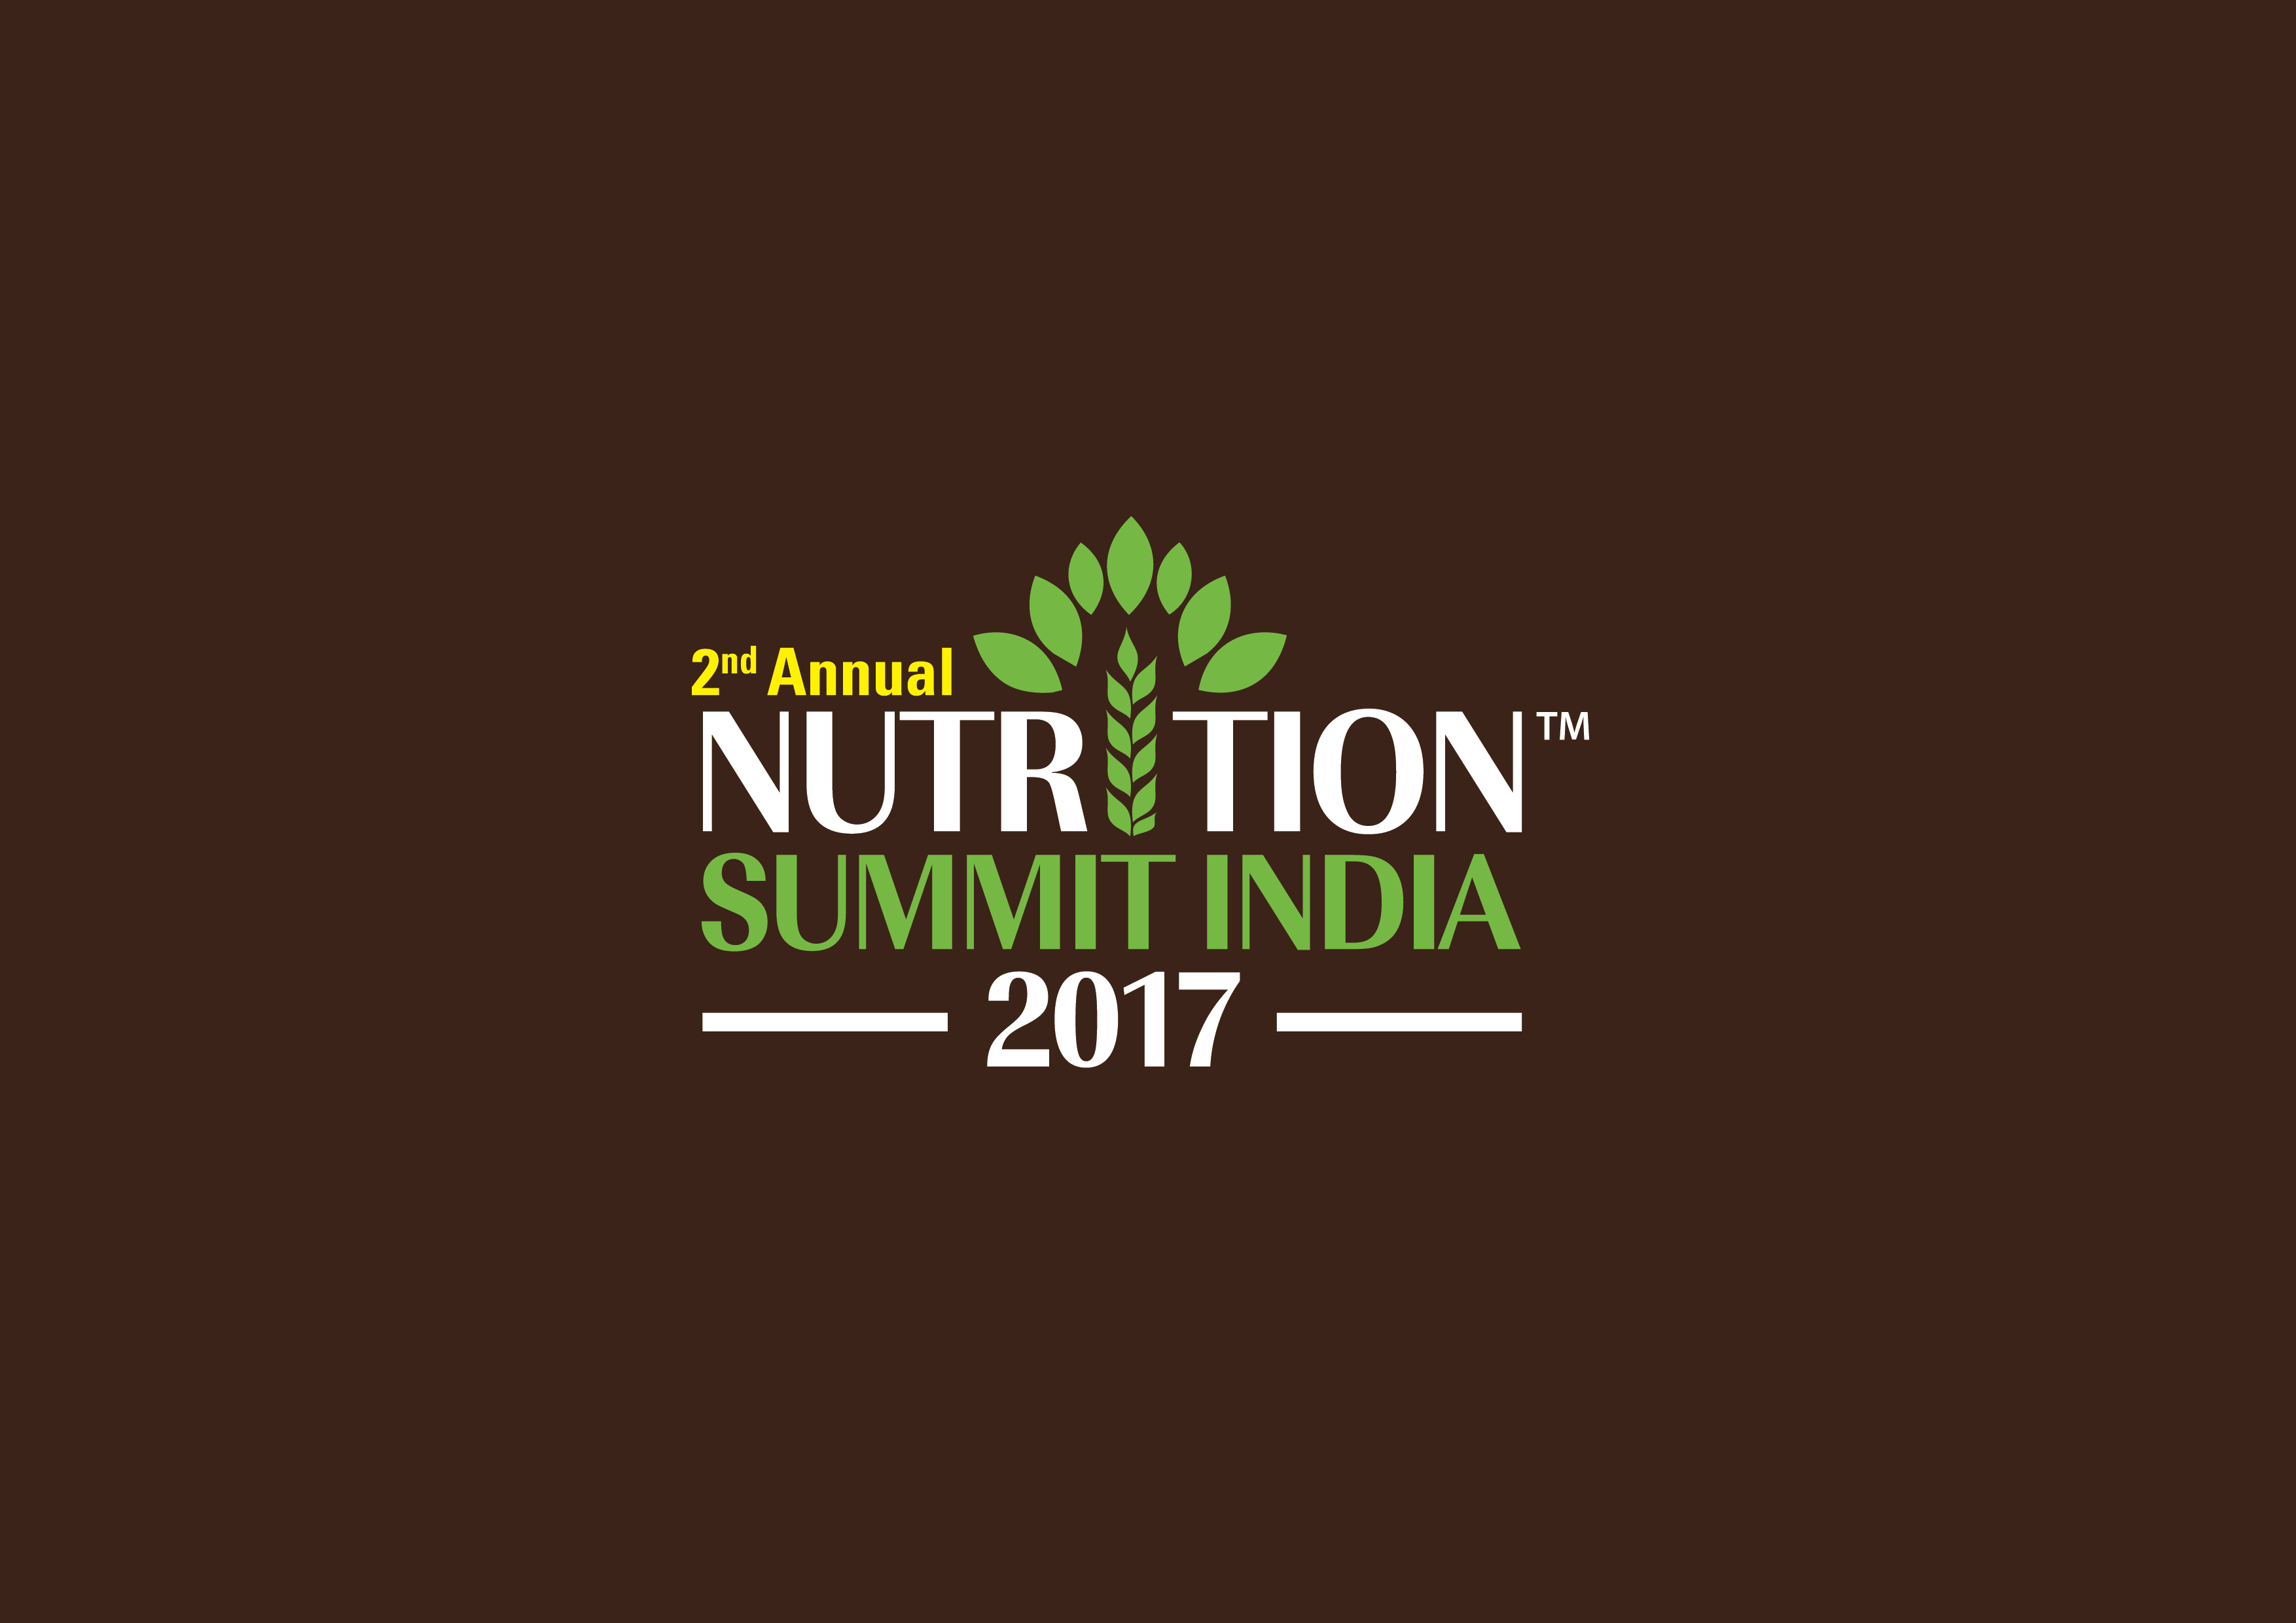 2nd Annual Nutrition Summit India 2017 is the only dedicated conference which provides a common platform for the industry and other stakeholders to come together to discuss the key challenges, learn from the best practices adopted across the country and ensure their firm is positioned to comply with latest regulatory guidelines.

